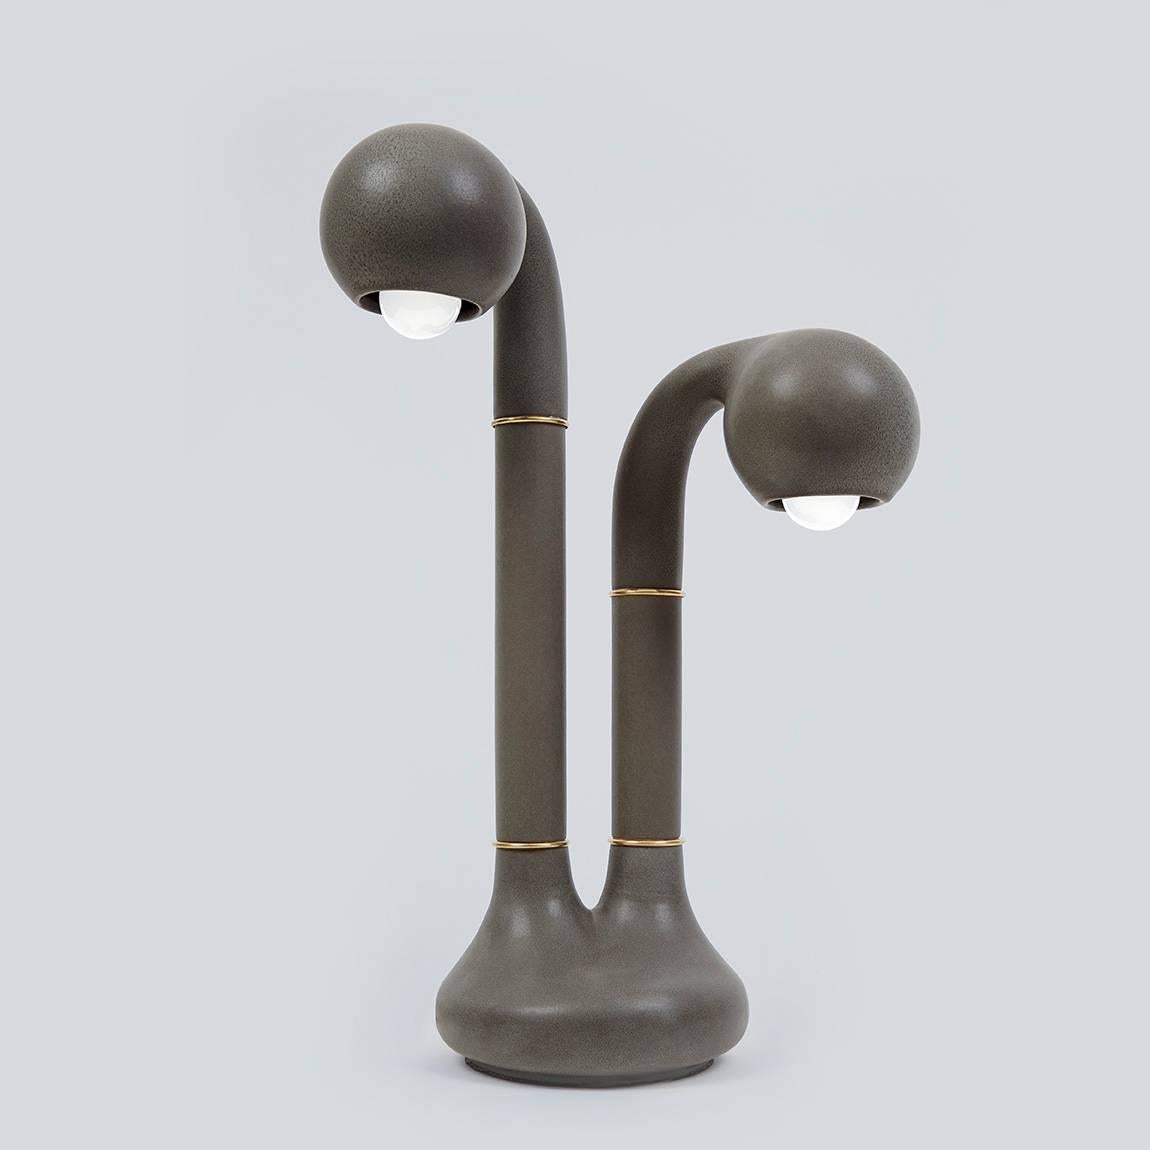 A charming, asymmetrical two-globe lamp handmade and cast in our workshop in downtown Los Angeles. Our table lamp will bring sense of joy and light to brighten your space.

Glazes are in gloss black, matte black, charcoal, pink, alabaster, yellow,